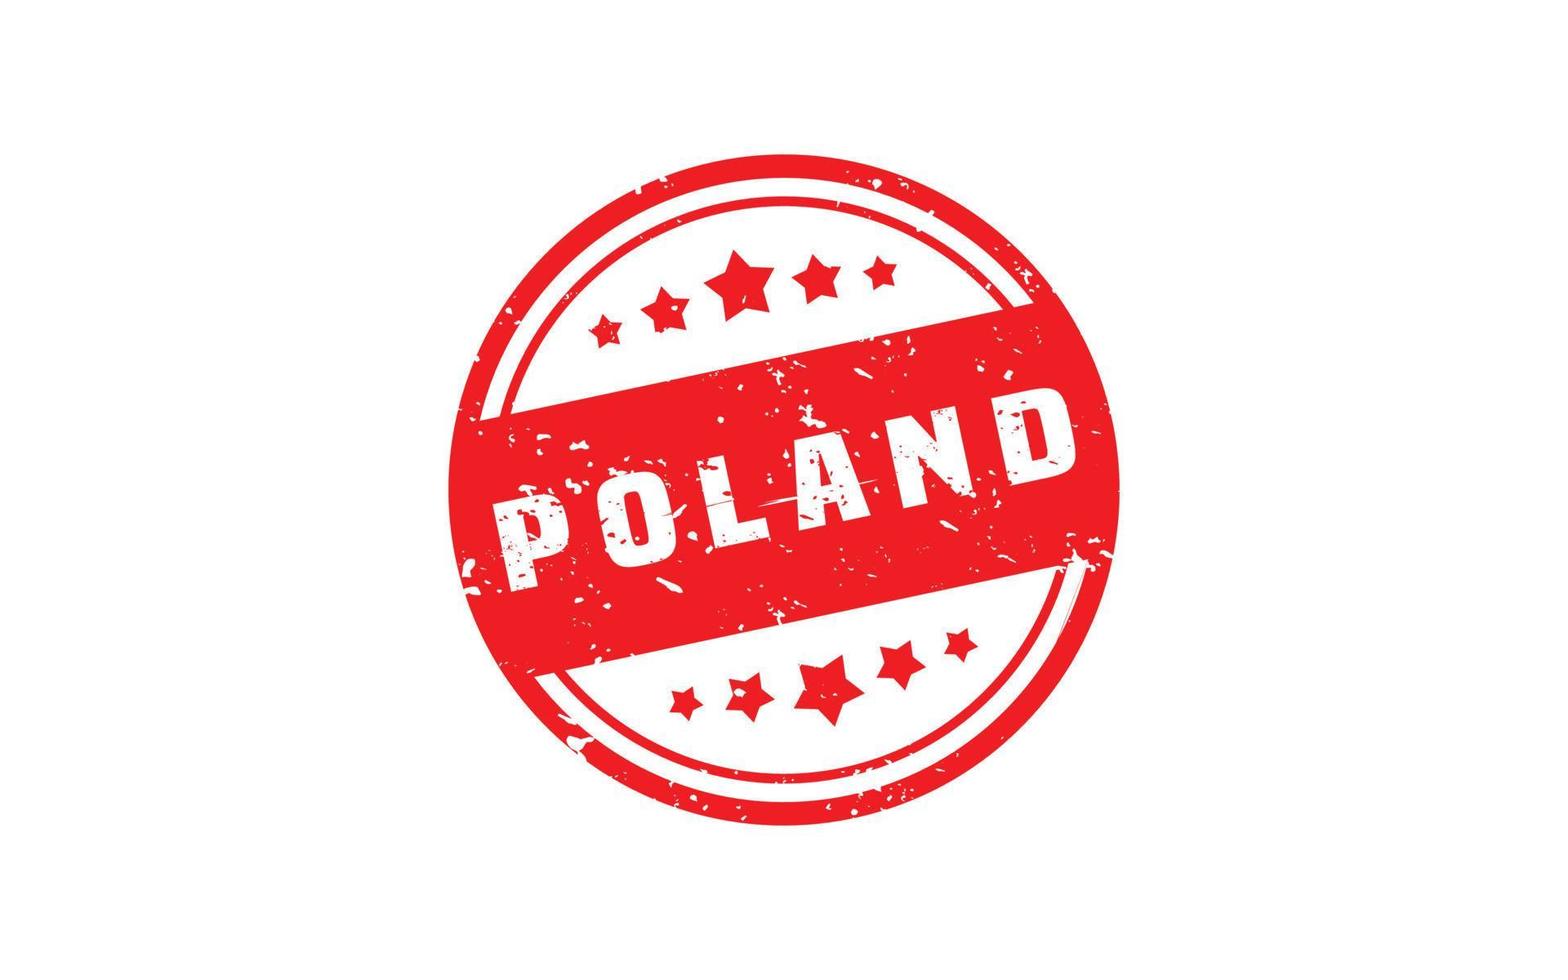 POLAND stamp rubber with grunge style on white background vector